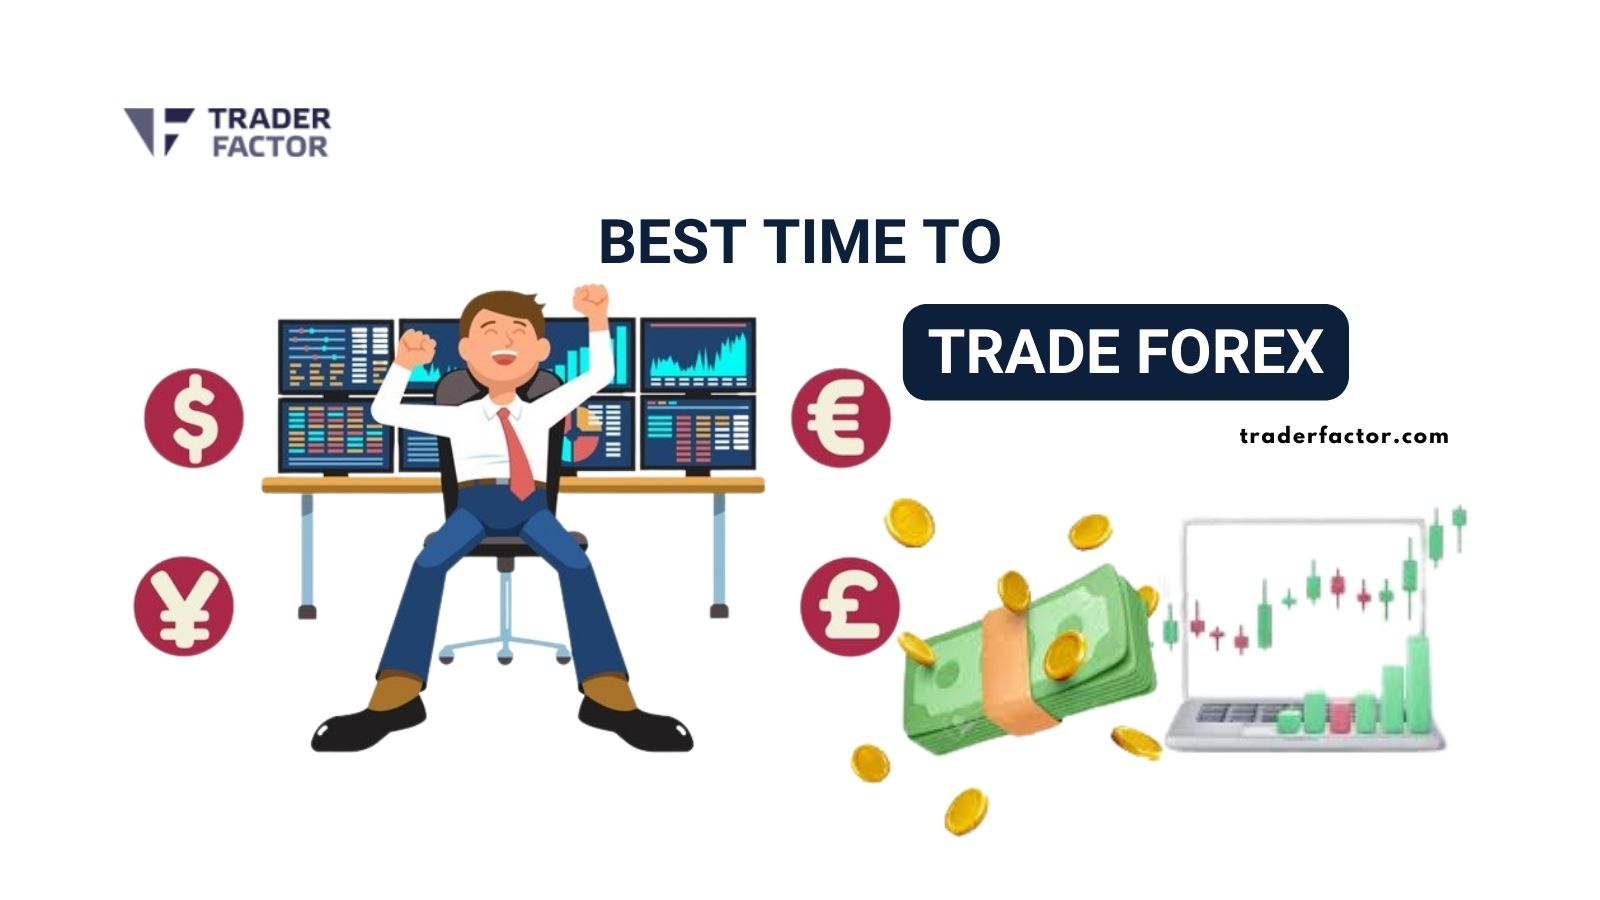 Best time to trade forex